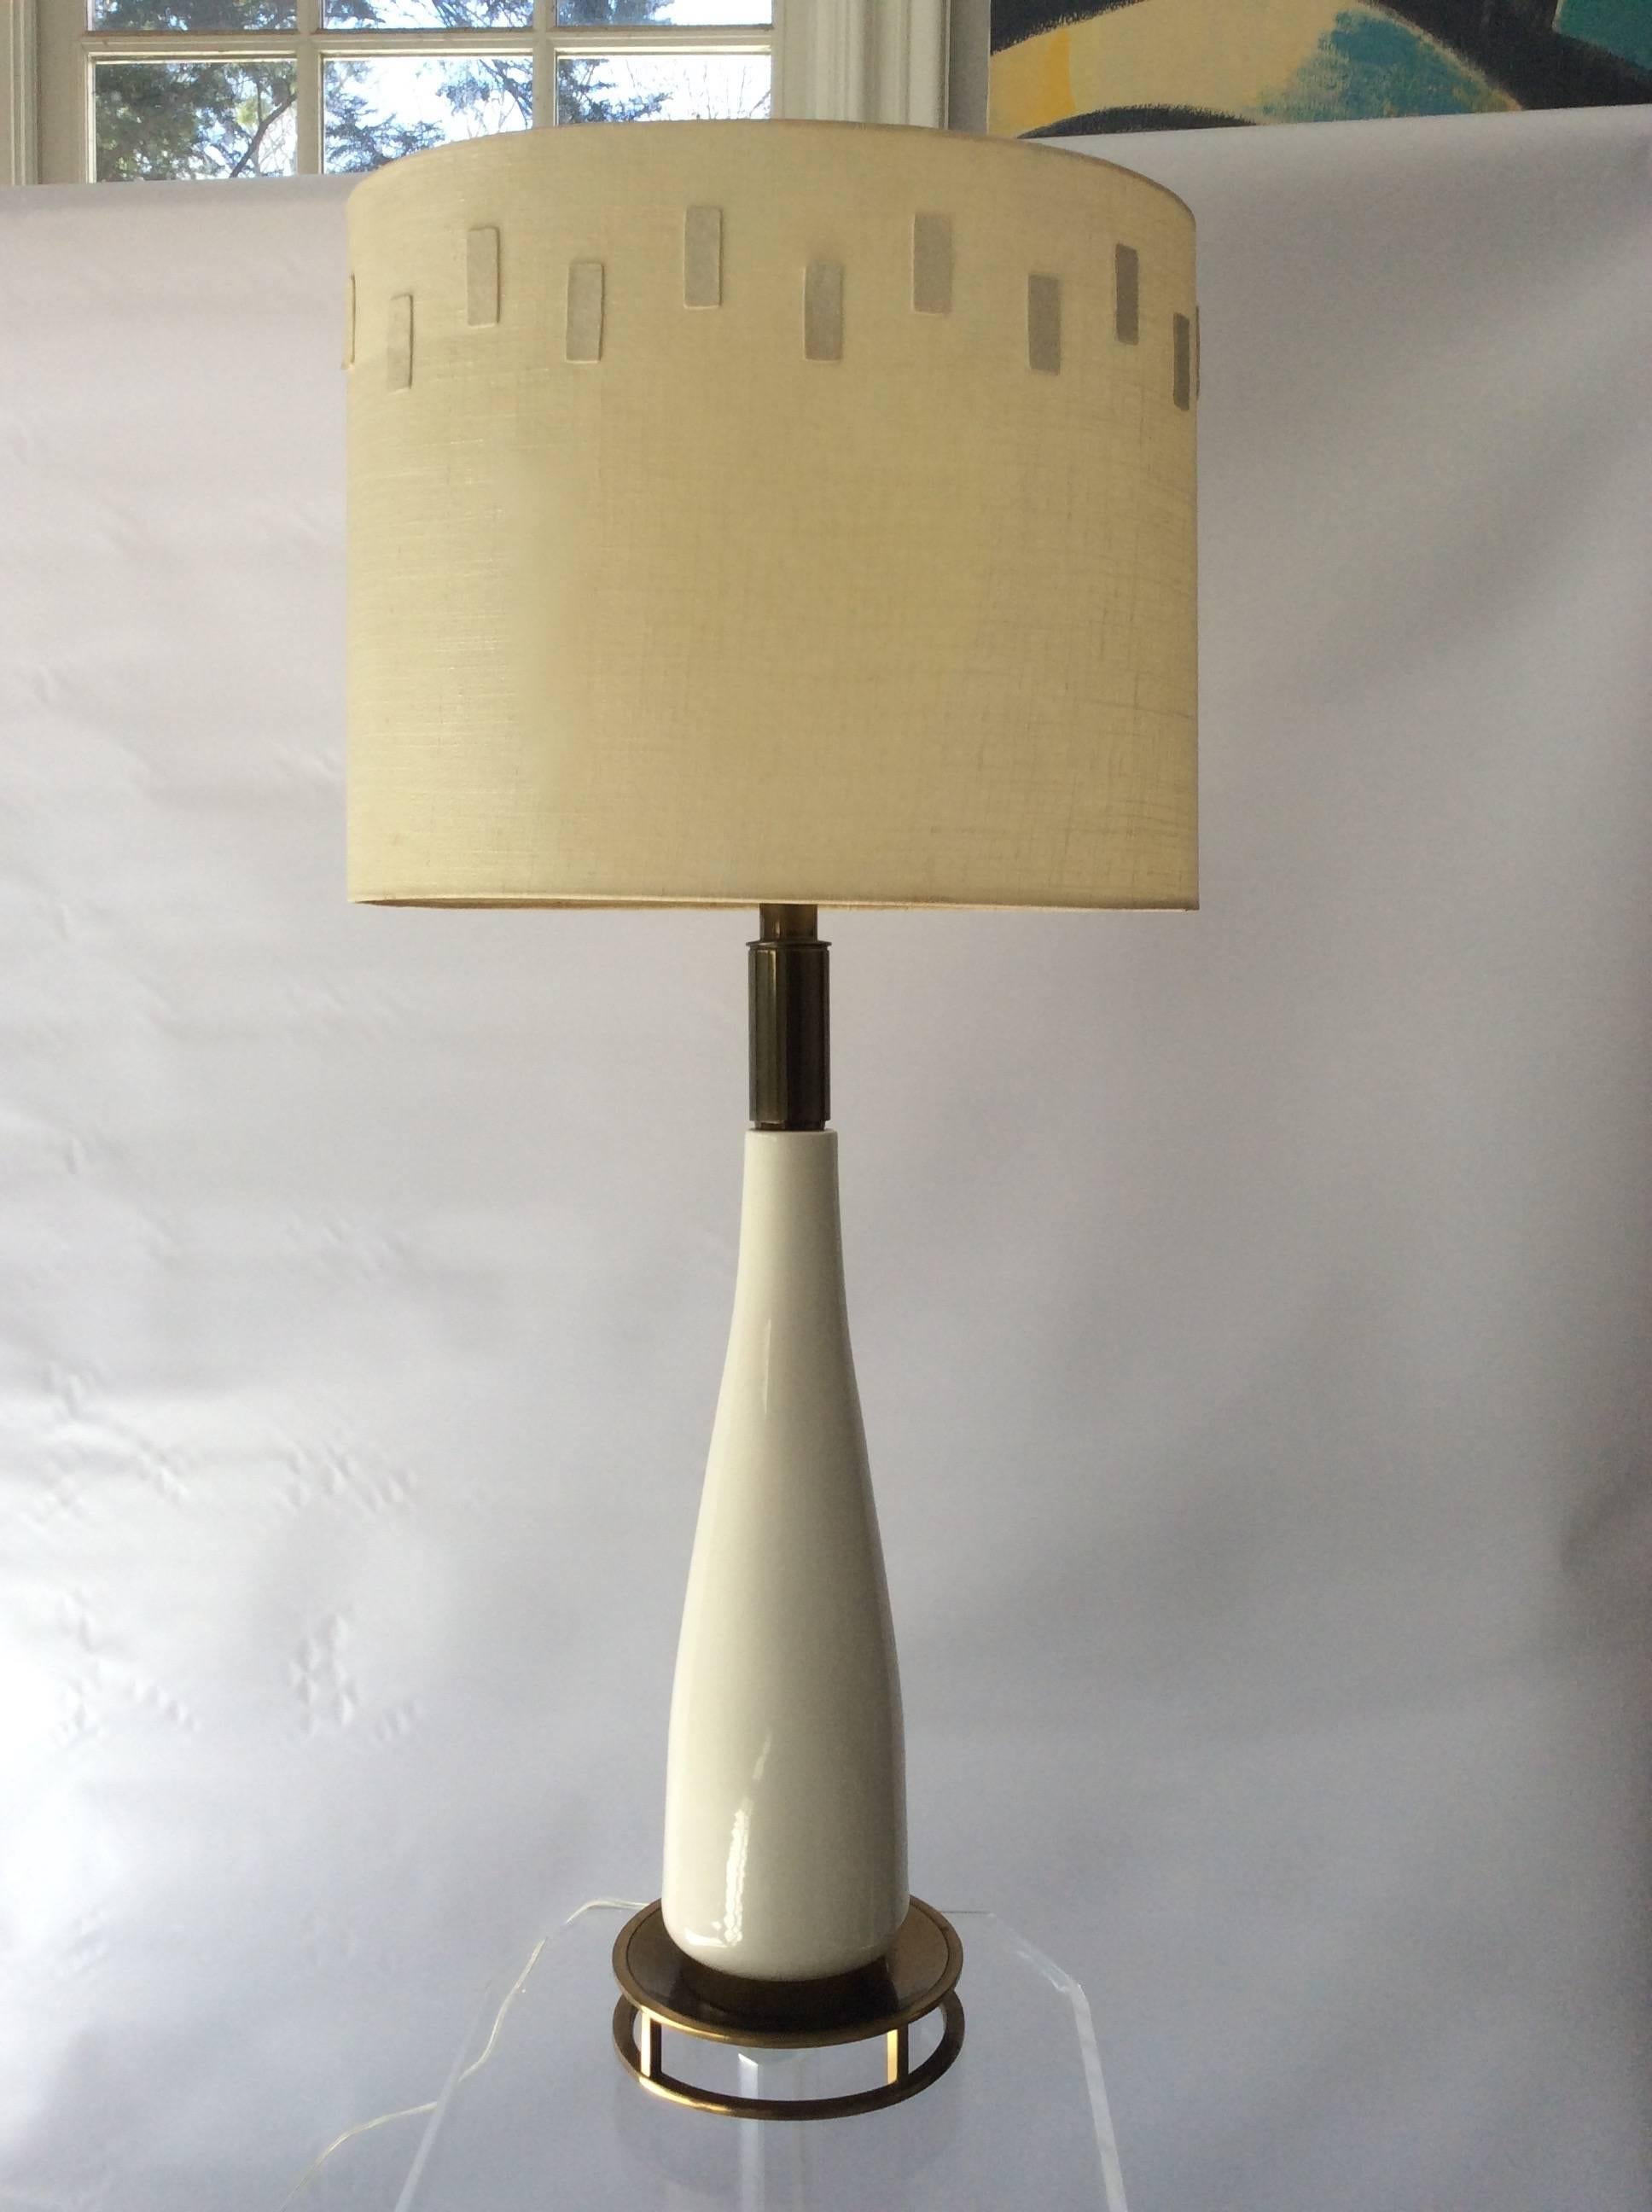 Large-scale Mid-Century table lamp by Stiffel Lighting, 1960s, unsigned. Glamorous white glazed ceramic body, with beautifully patinated brass neck, and open fretwork base. Newly rewired, shade not included. Excellent condition.